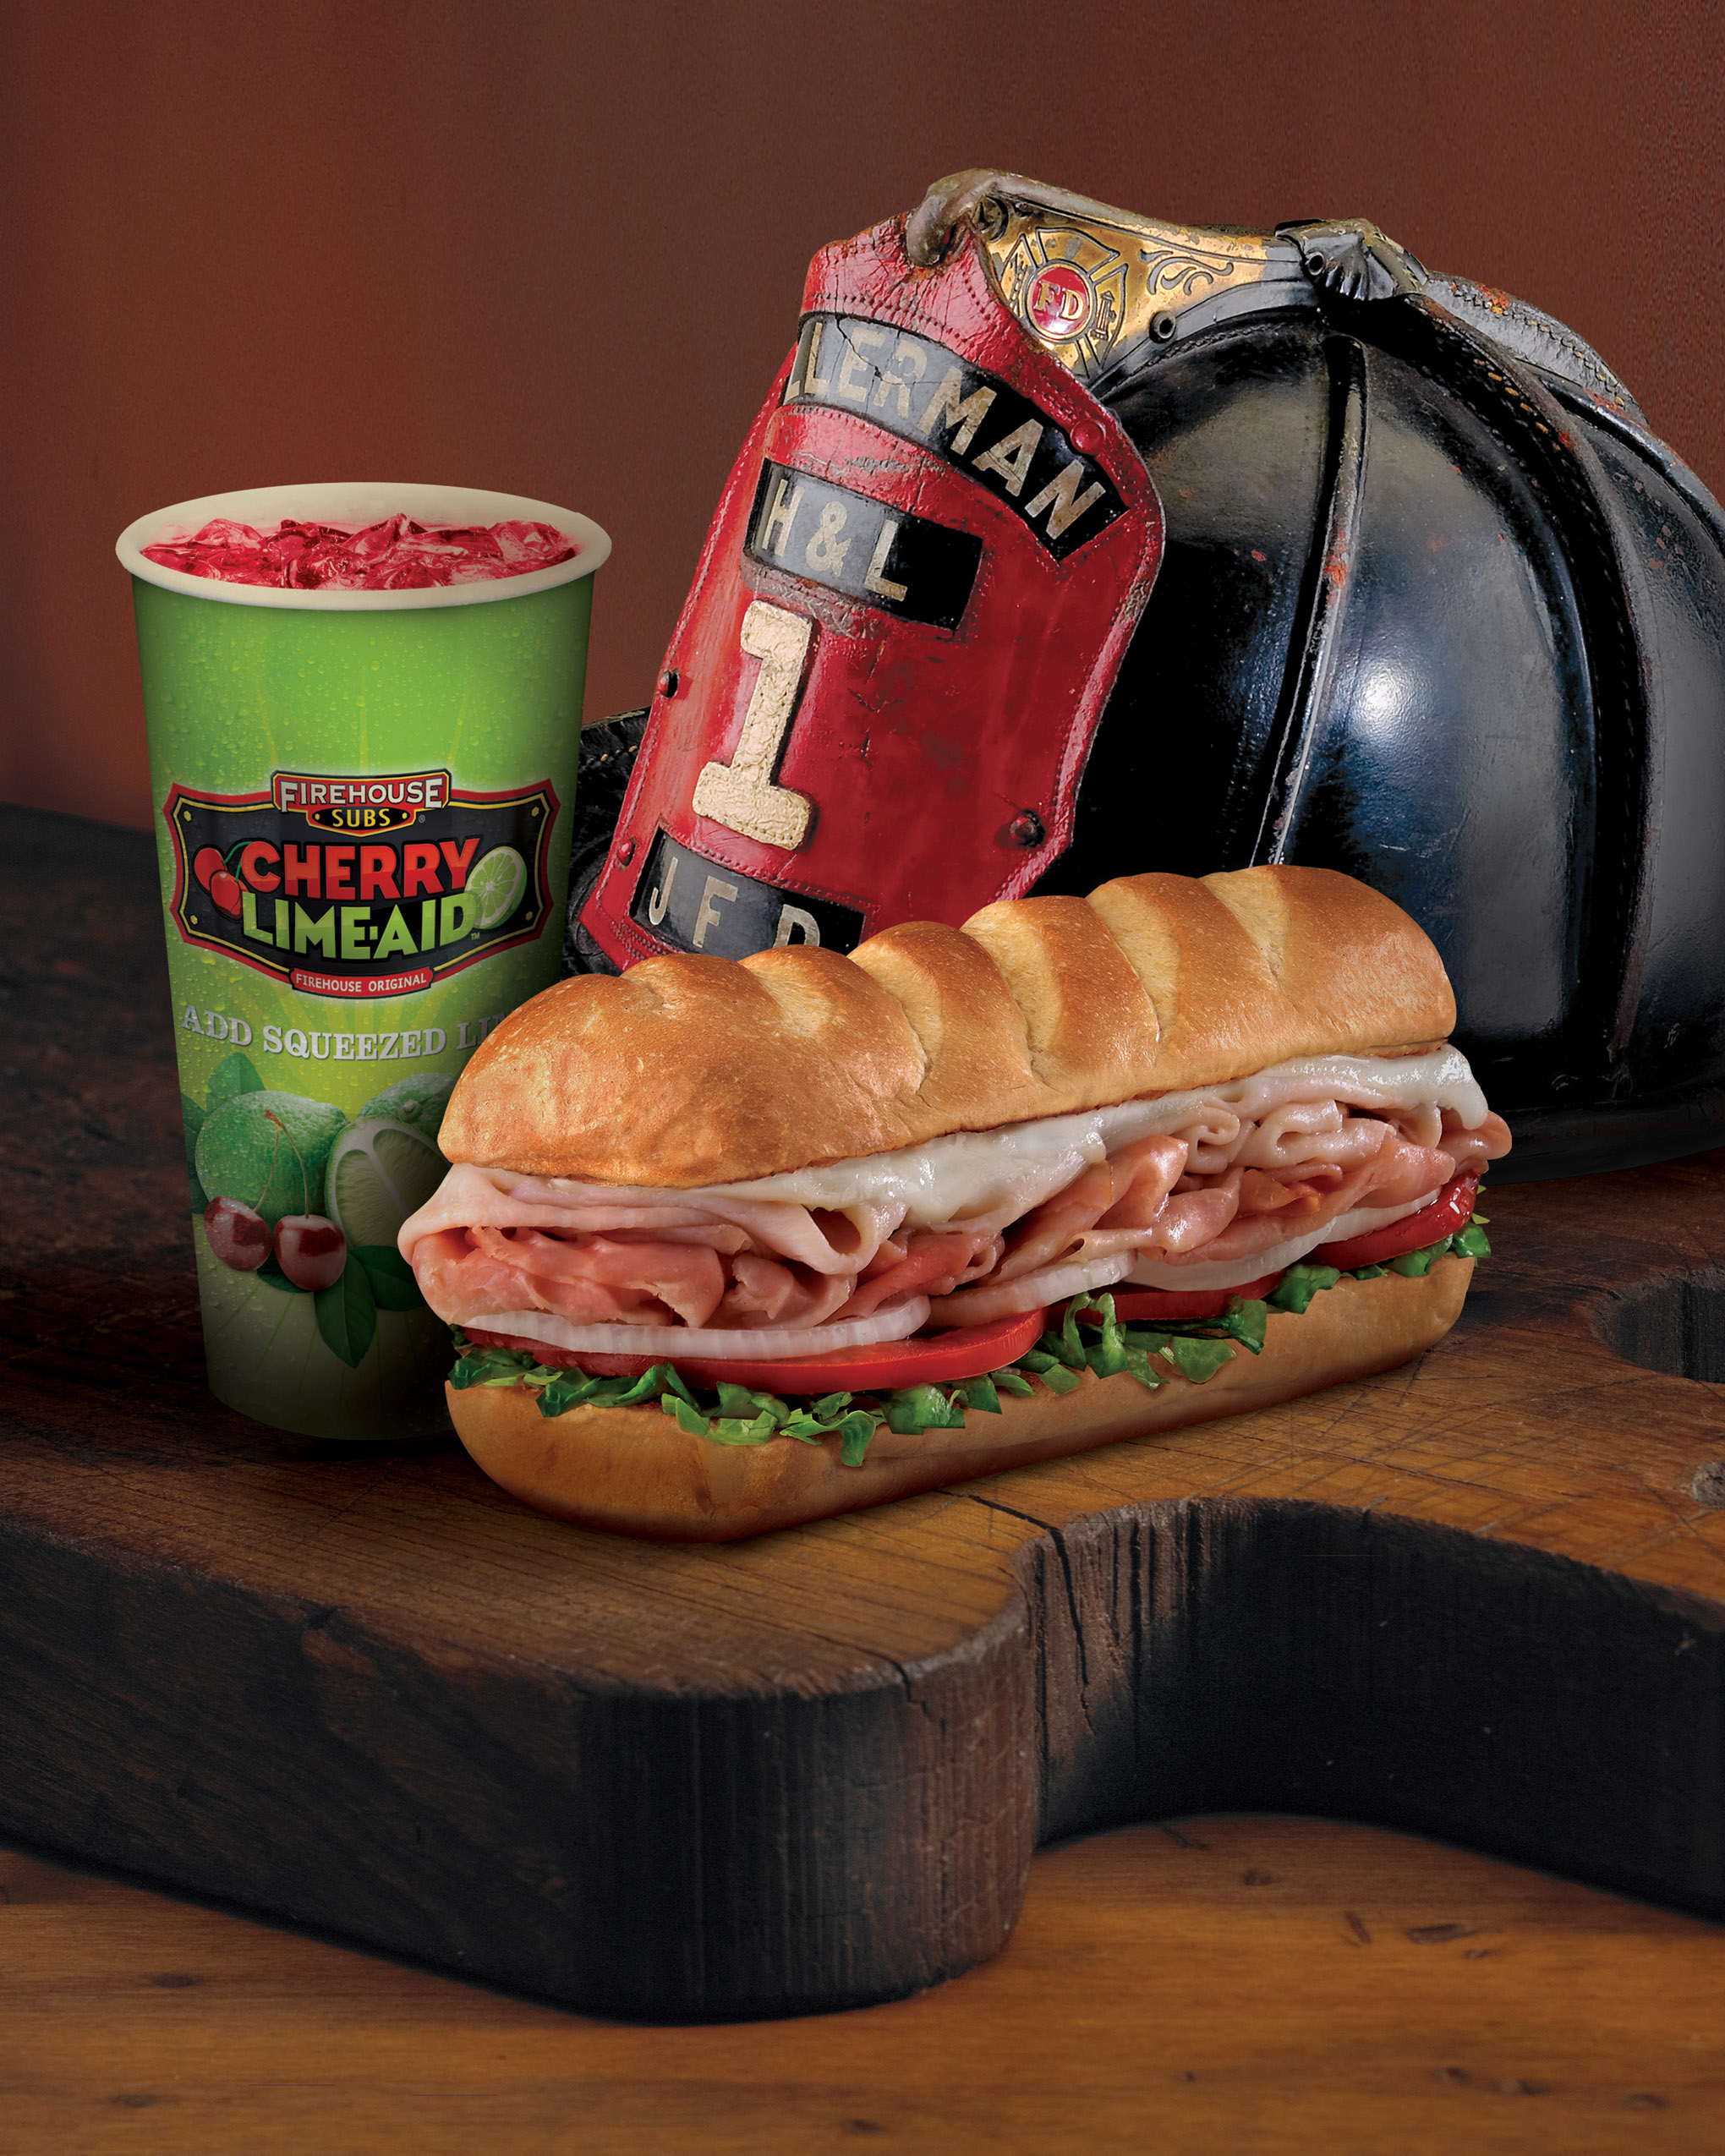 A Firehouse sub with a cherry lime-aid and a firefighter helmet, on wood